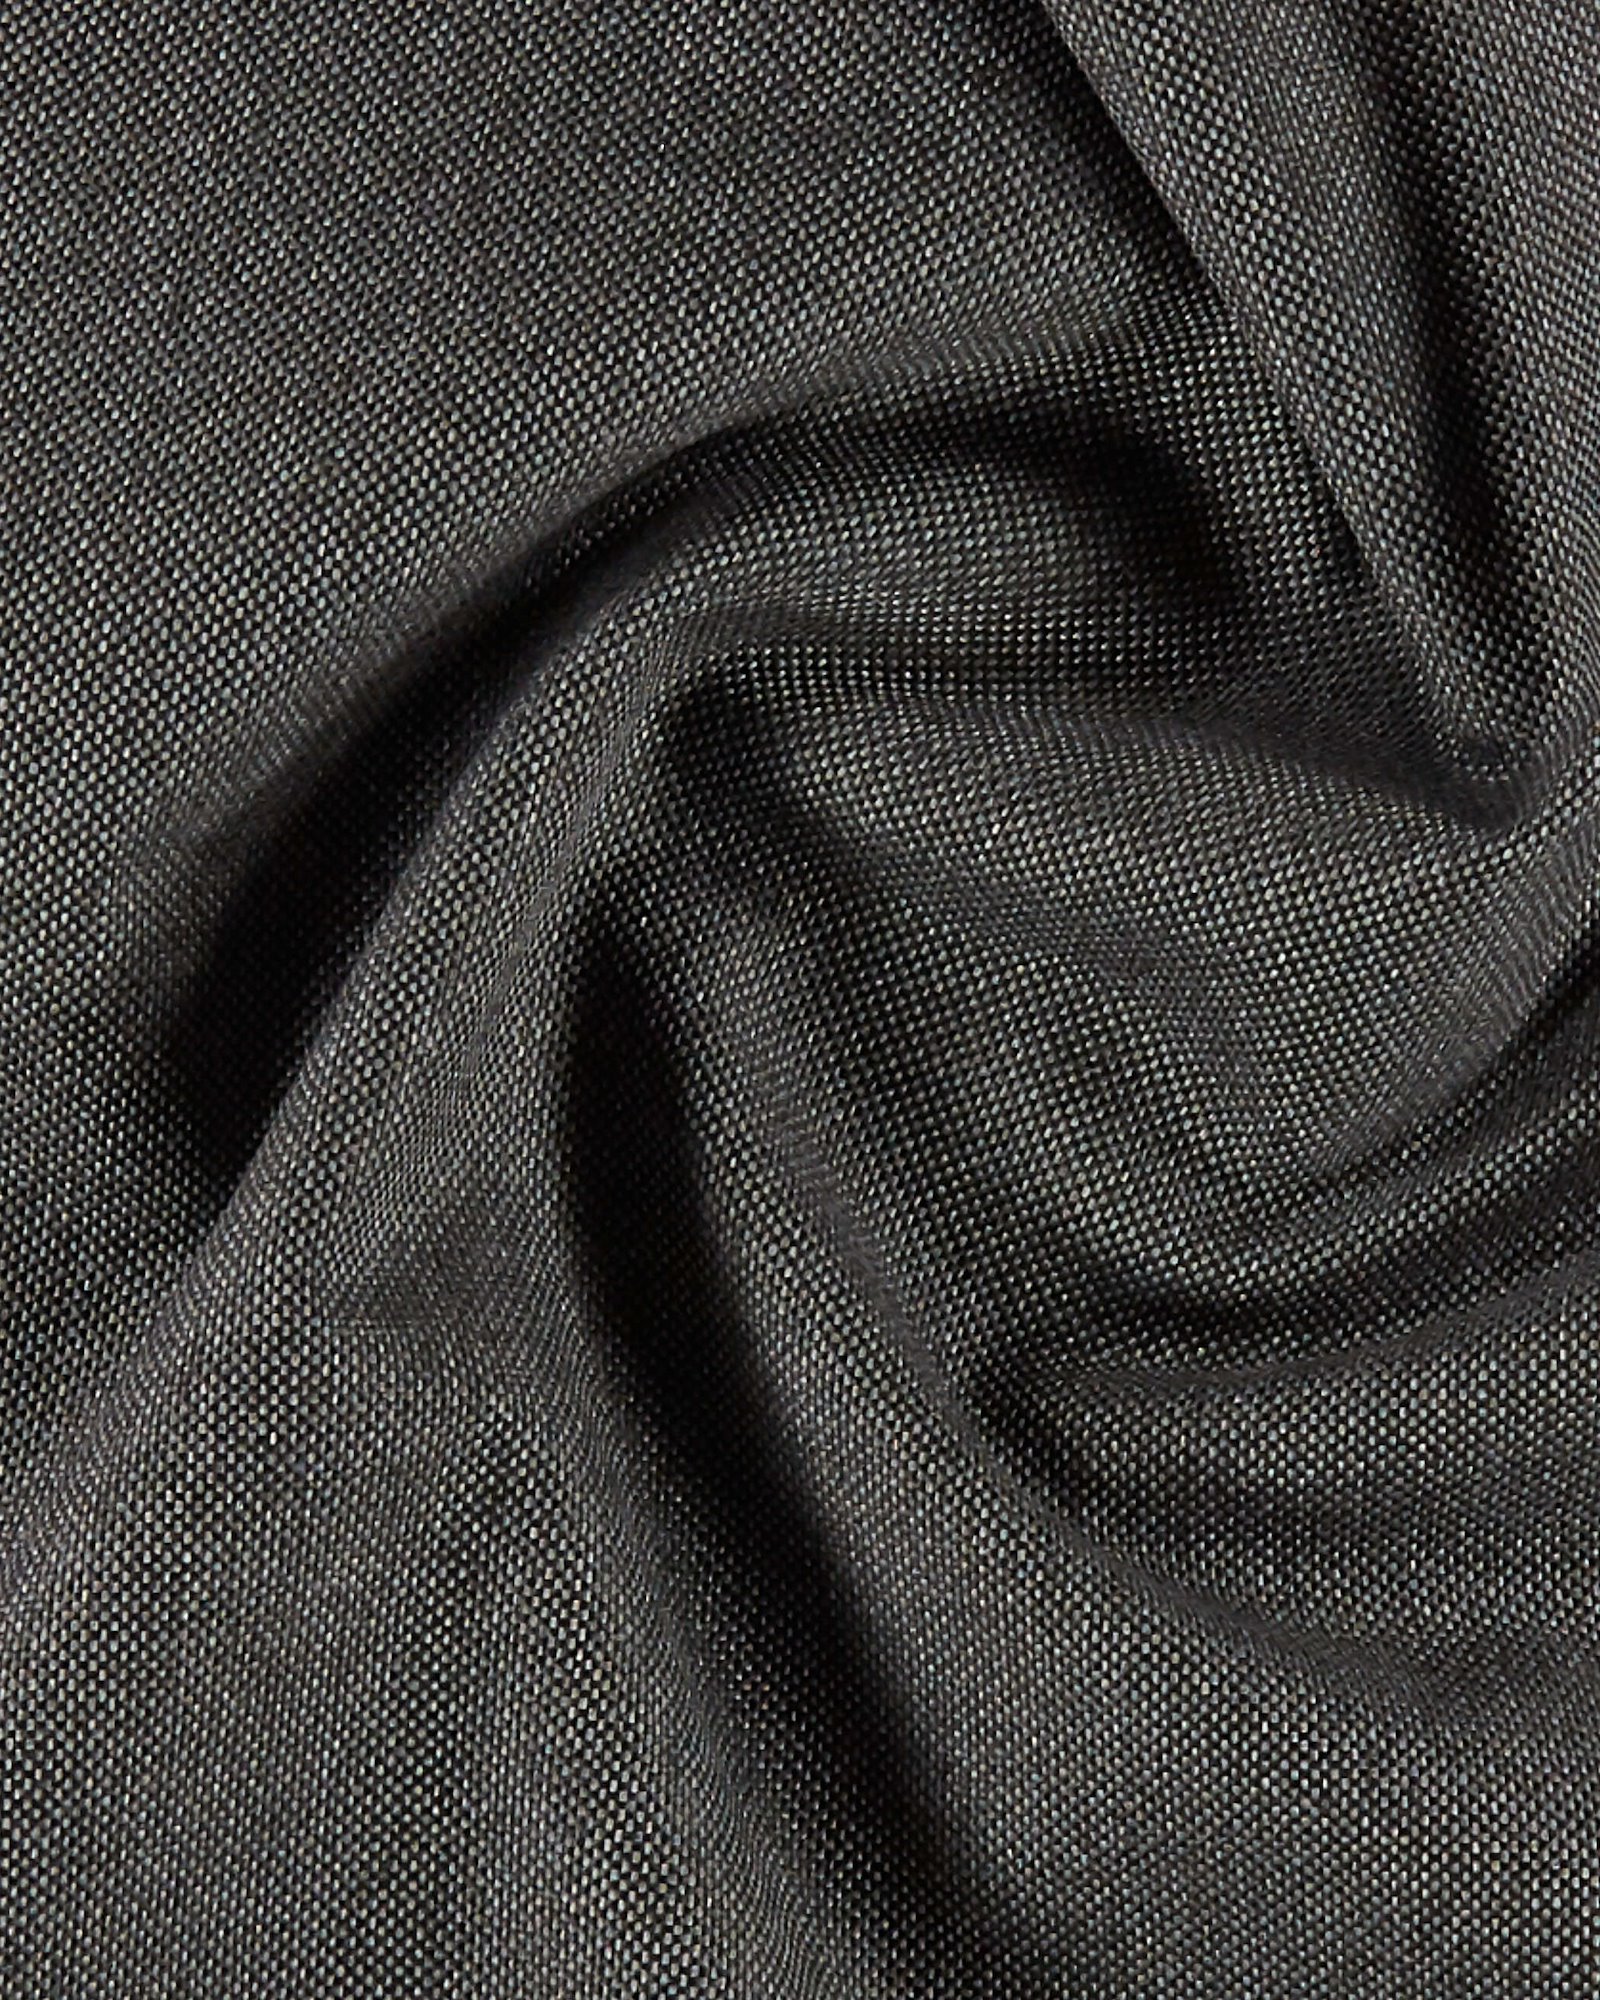 Upholstery fabric black/grey 822233_pack